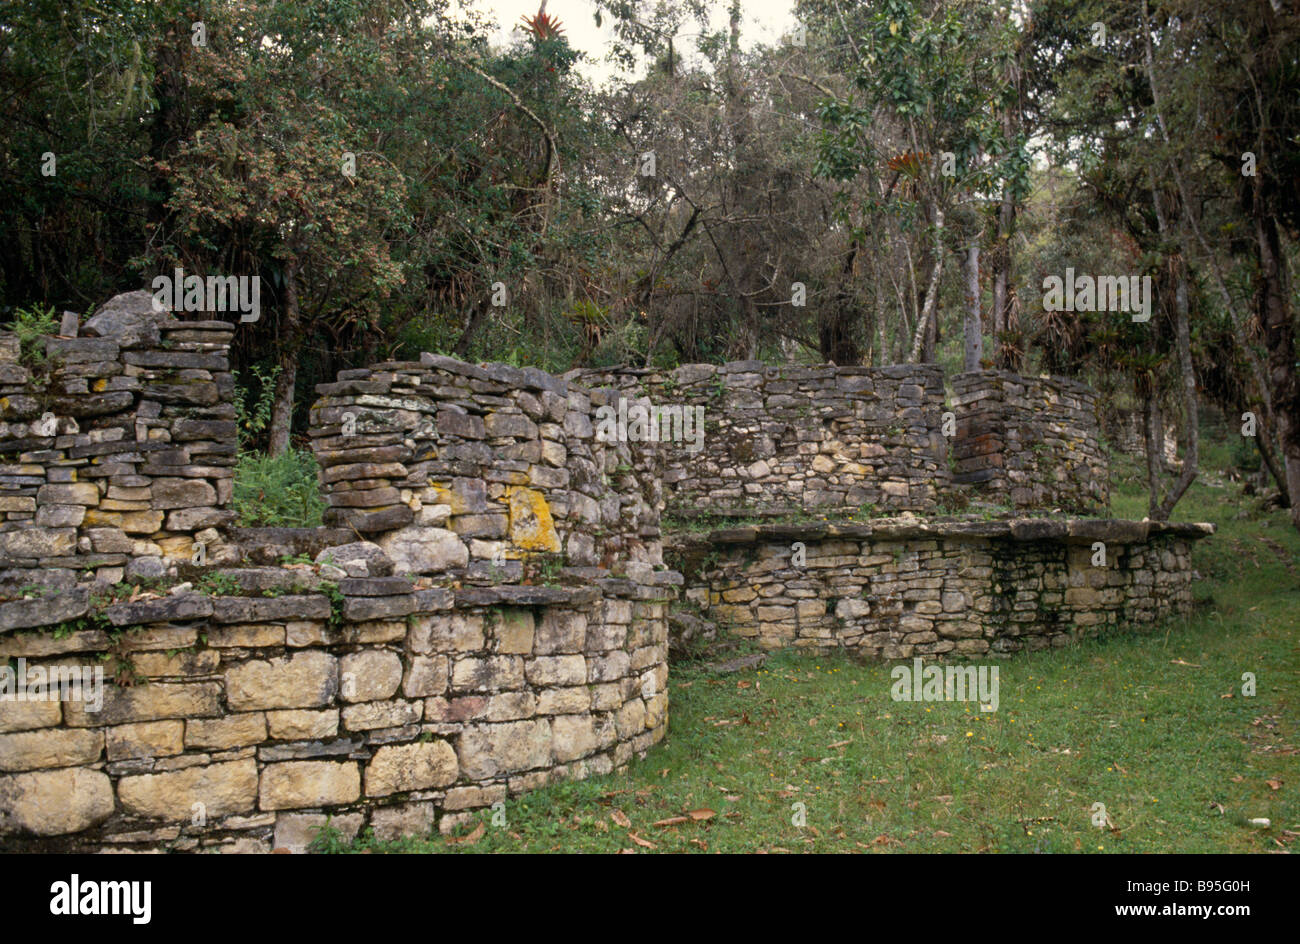 PERU South America Amazonas Amazon Chachapoyas Kuelap Fortress ruins,  Chachapoyas culture also known as the Cloud Forest People Stock Photo -  Alamy